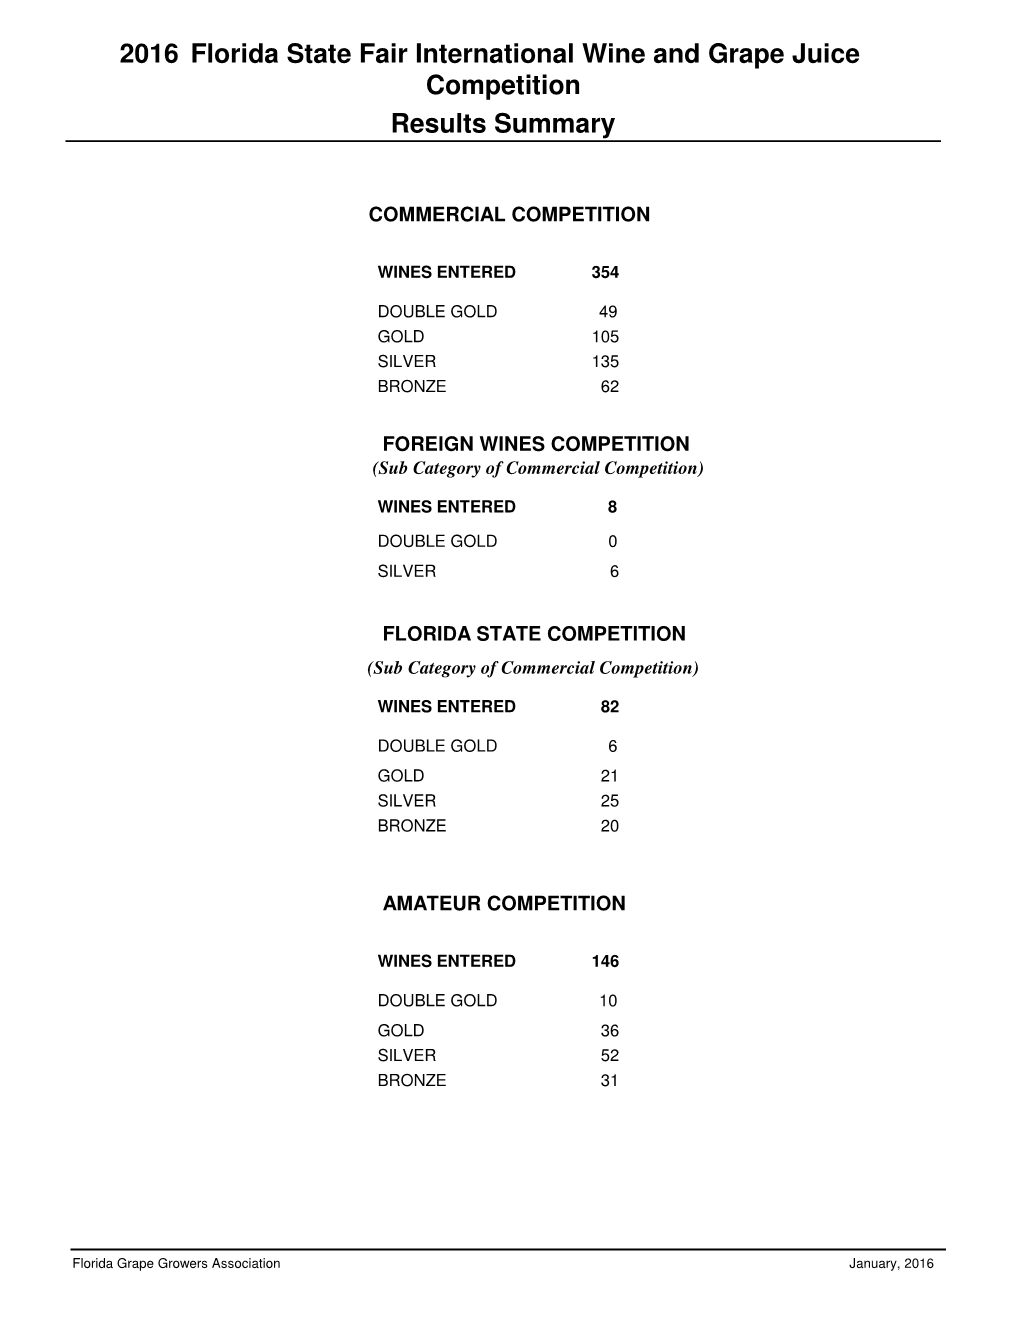 Florida State Fair International Wine and Grape Juice Competition Results Summary